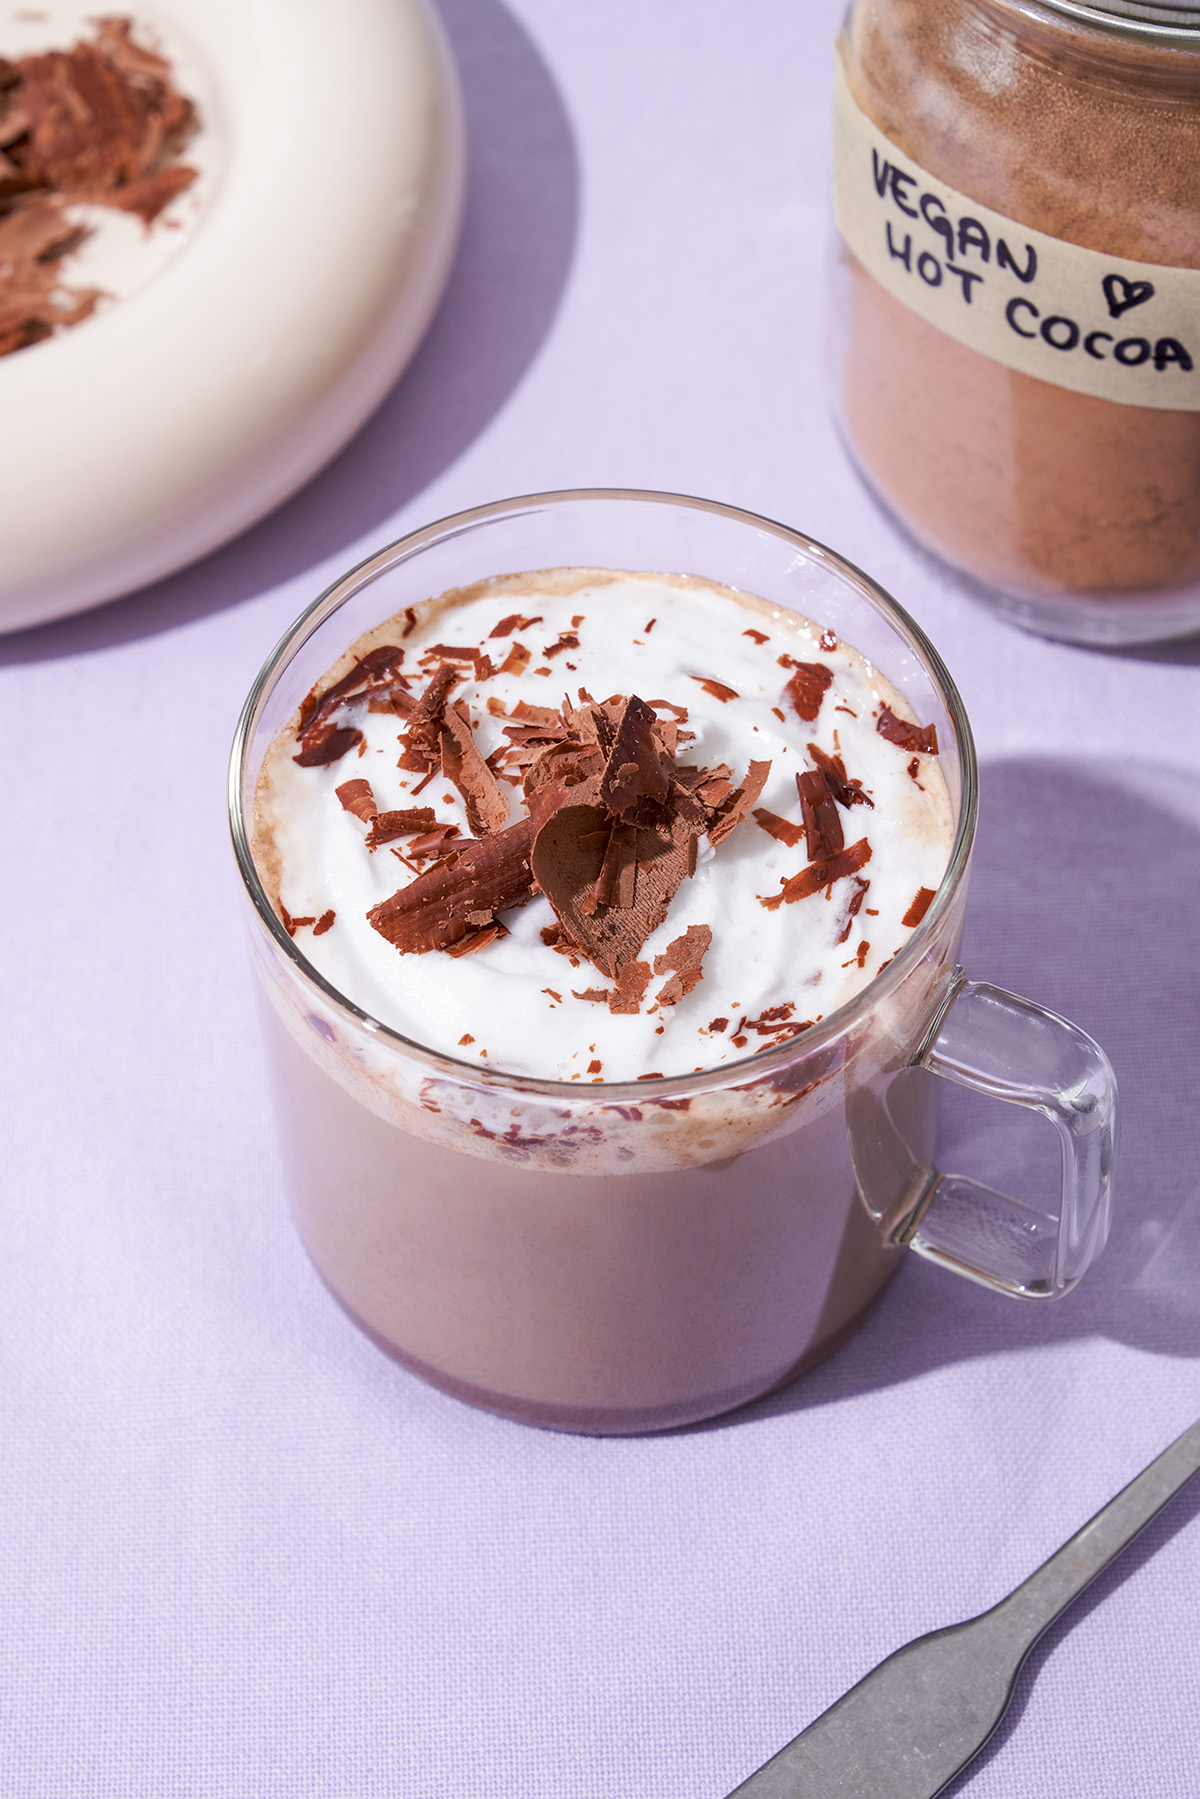 A glass mug of hot chocolate topped with cream and chocolate shavings.